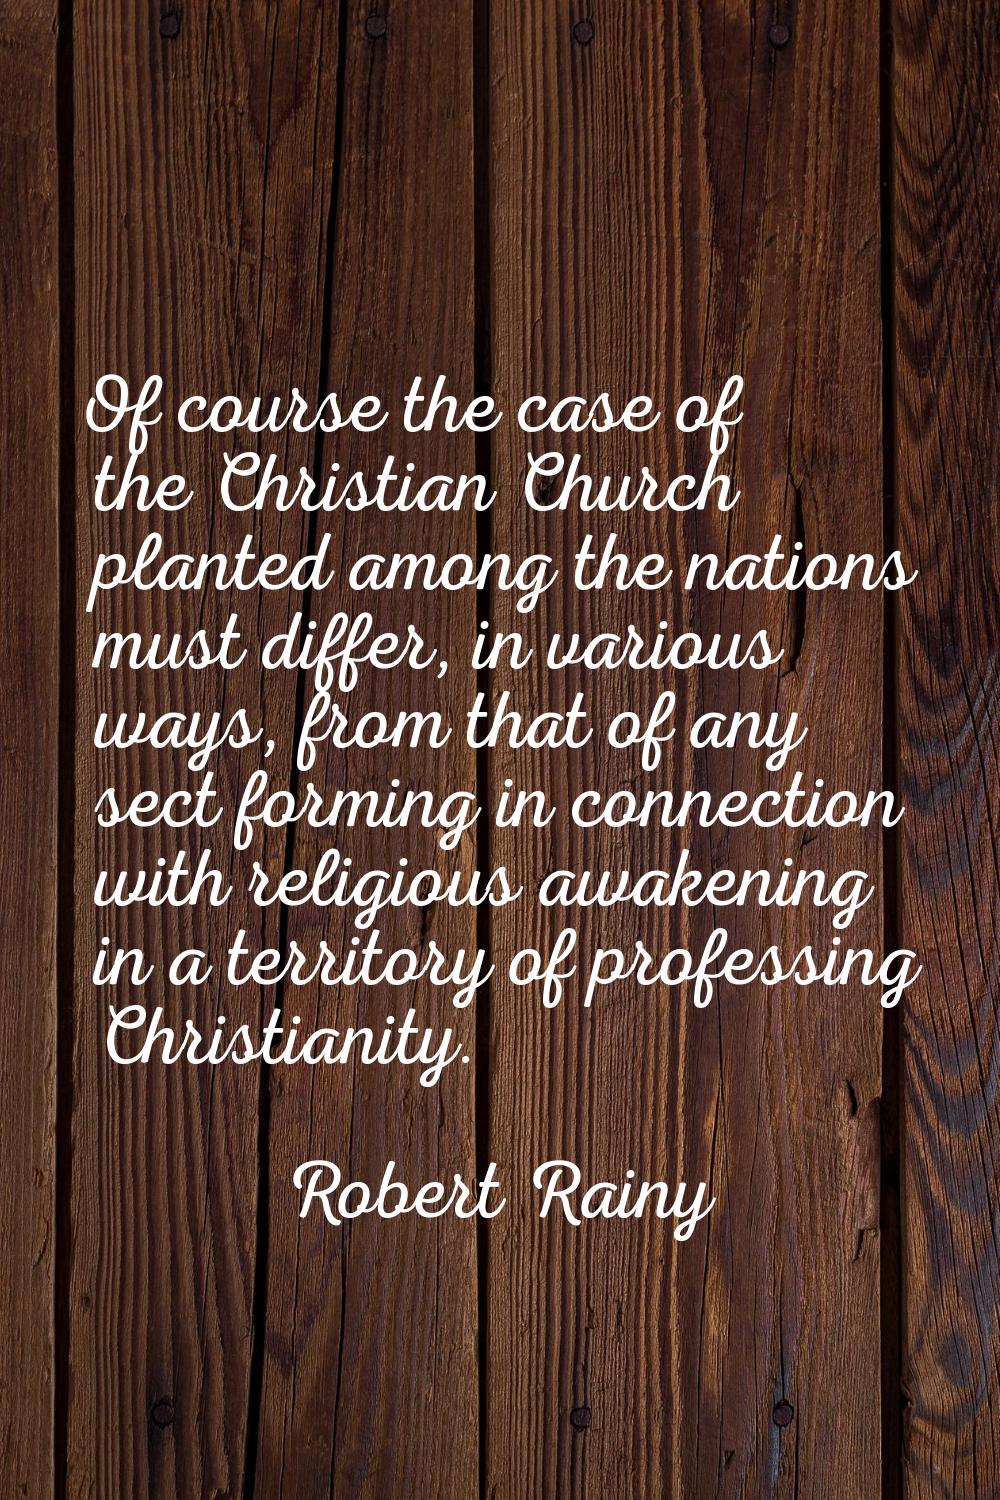 Of course the case of the Christian Church planted among the nations must differ, in various ways, 